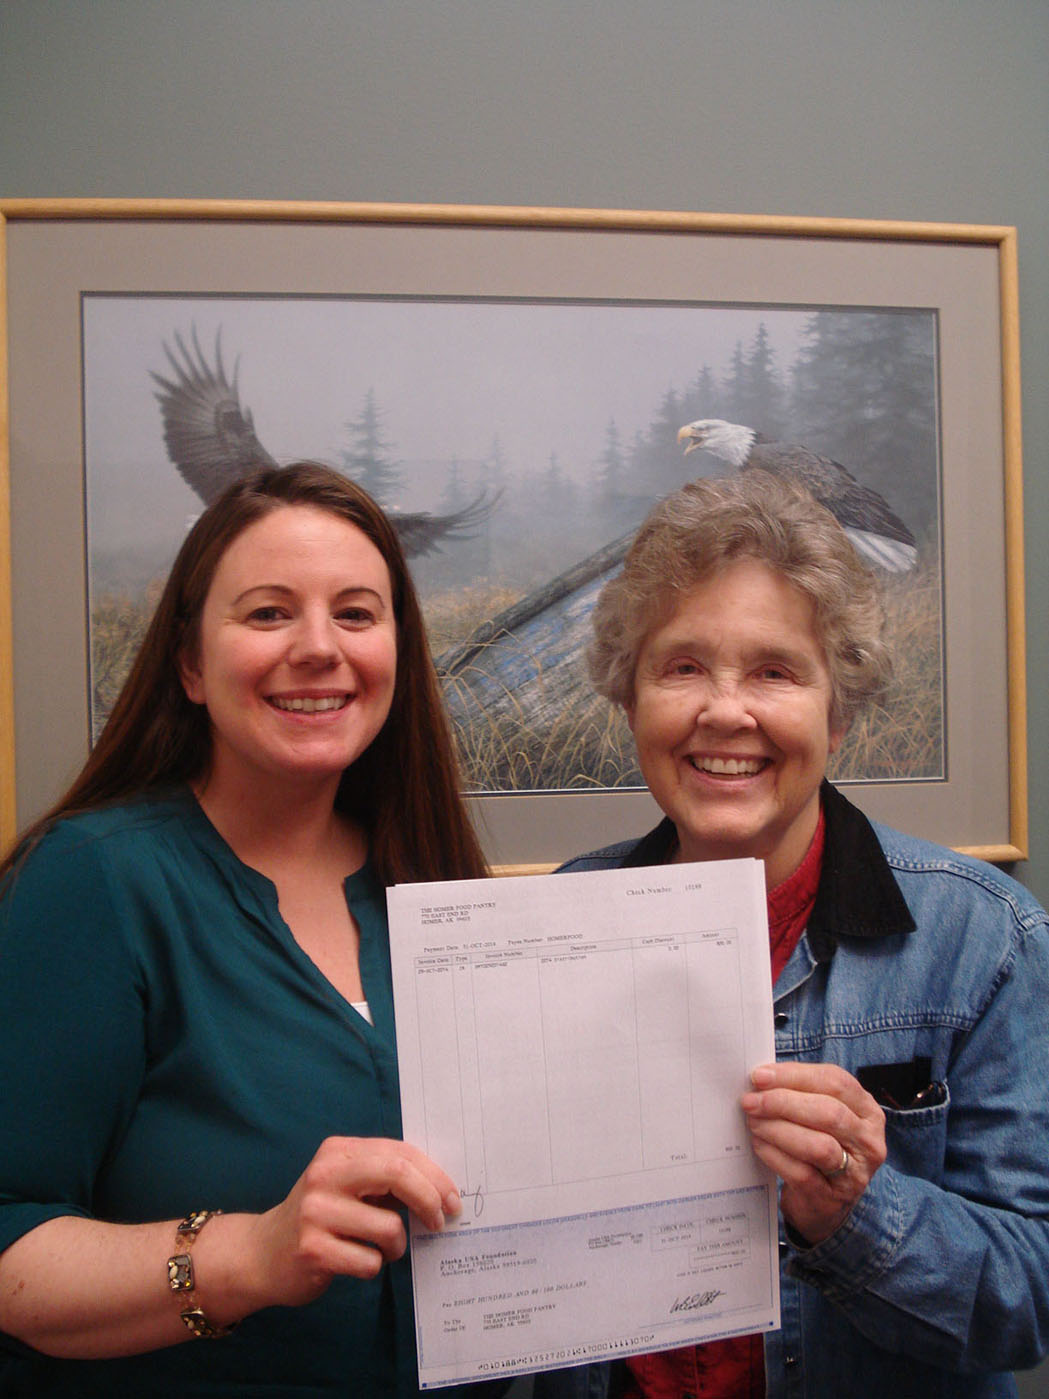 Alita Mahan, Homer branch manager of Alaska USA Federal Credit Union, presents a check for $800 to Diana Jeska of the Homer Community Food Pantry. Alaska USA Federal Credit Union members raised more than $66,000 for the annual Cash for Cans food drive across Alaska, California and Washington.